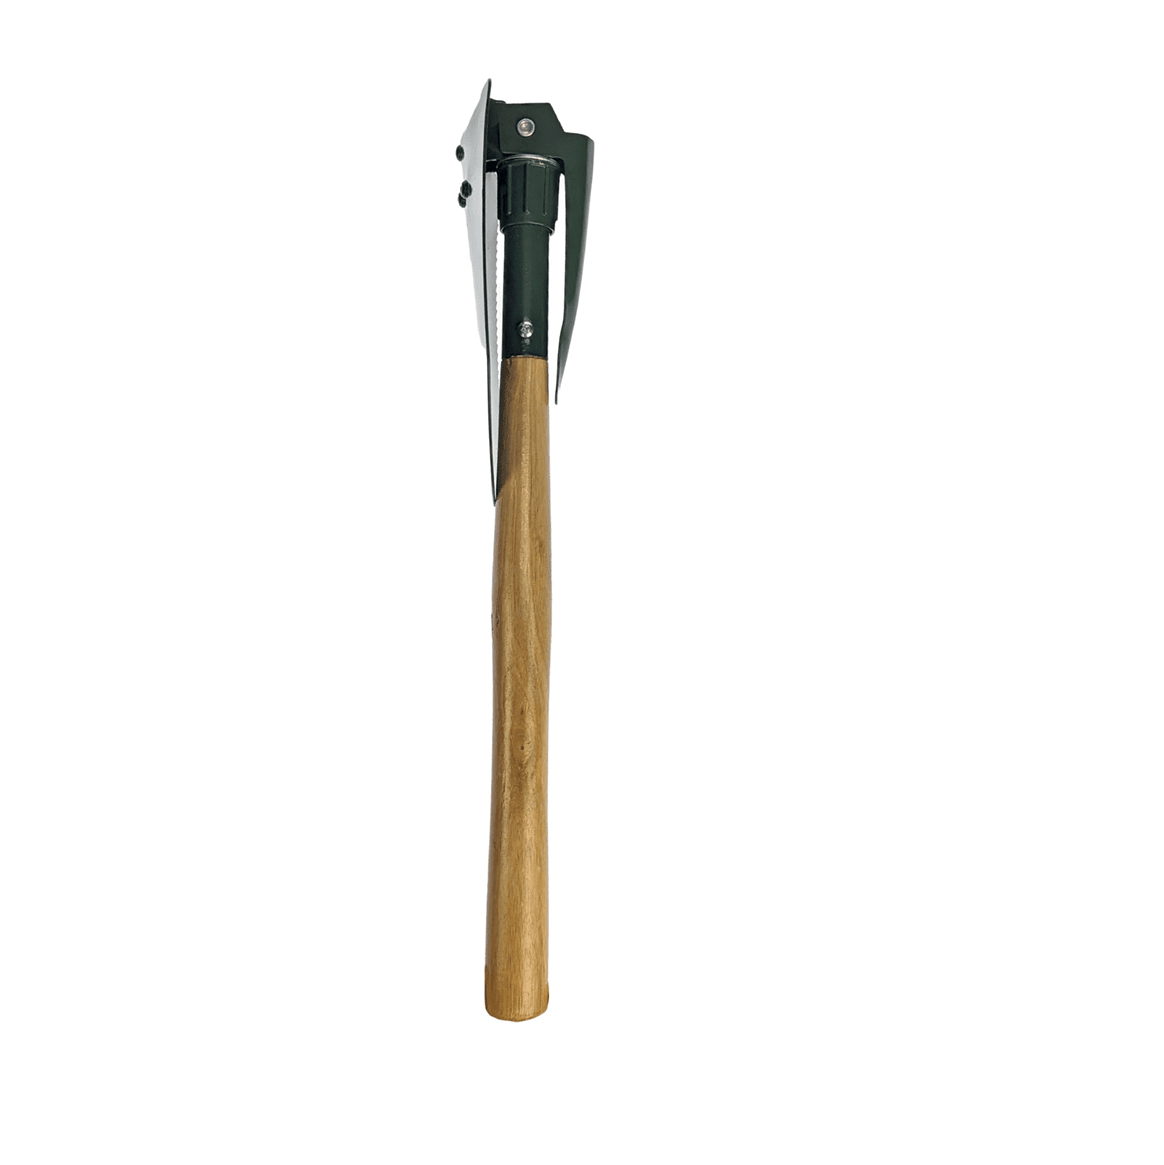 24-1/4" 45 HRC Hardness Steel Shovel and Pick with Wood Handle